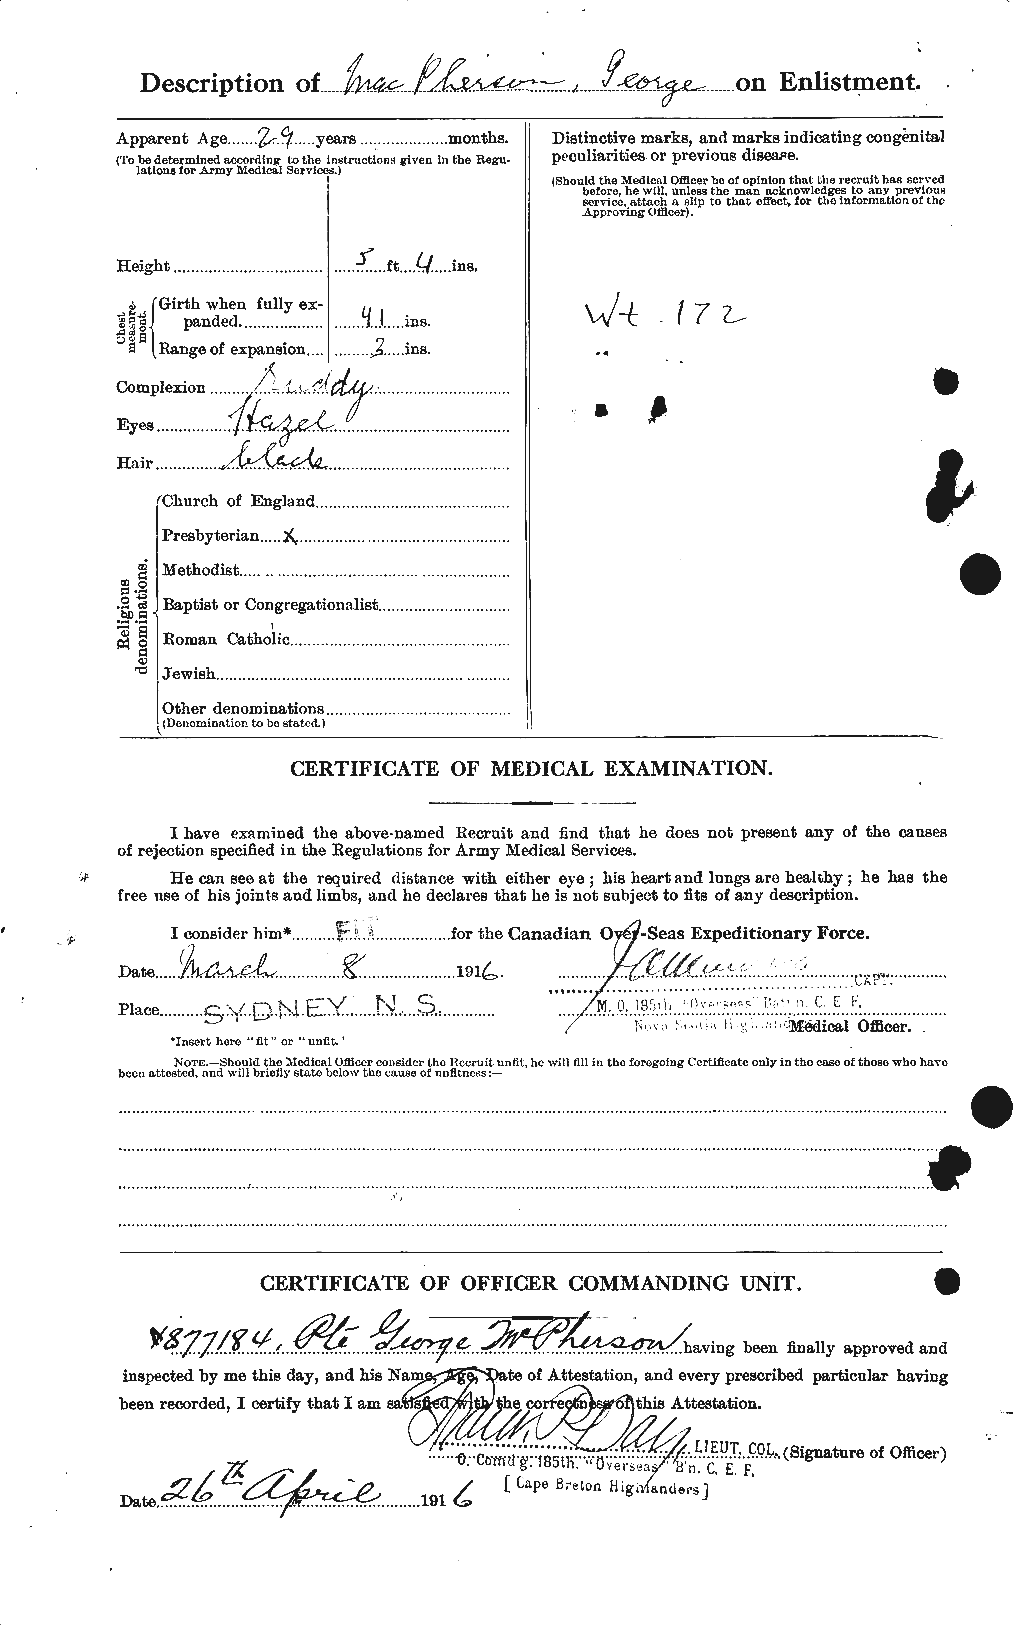 Personnel Records of the First World War - CEF 692465b